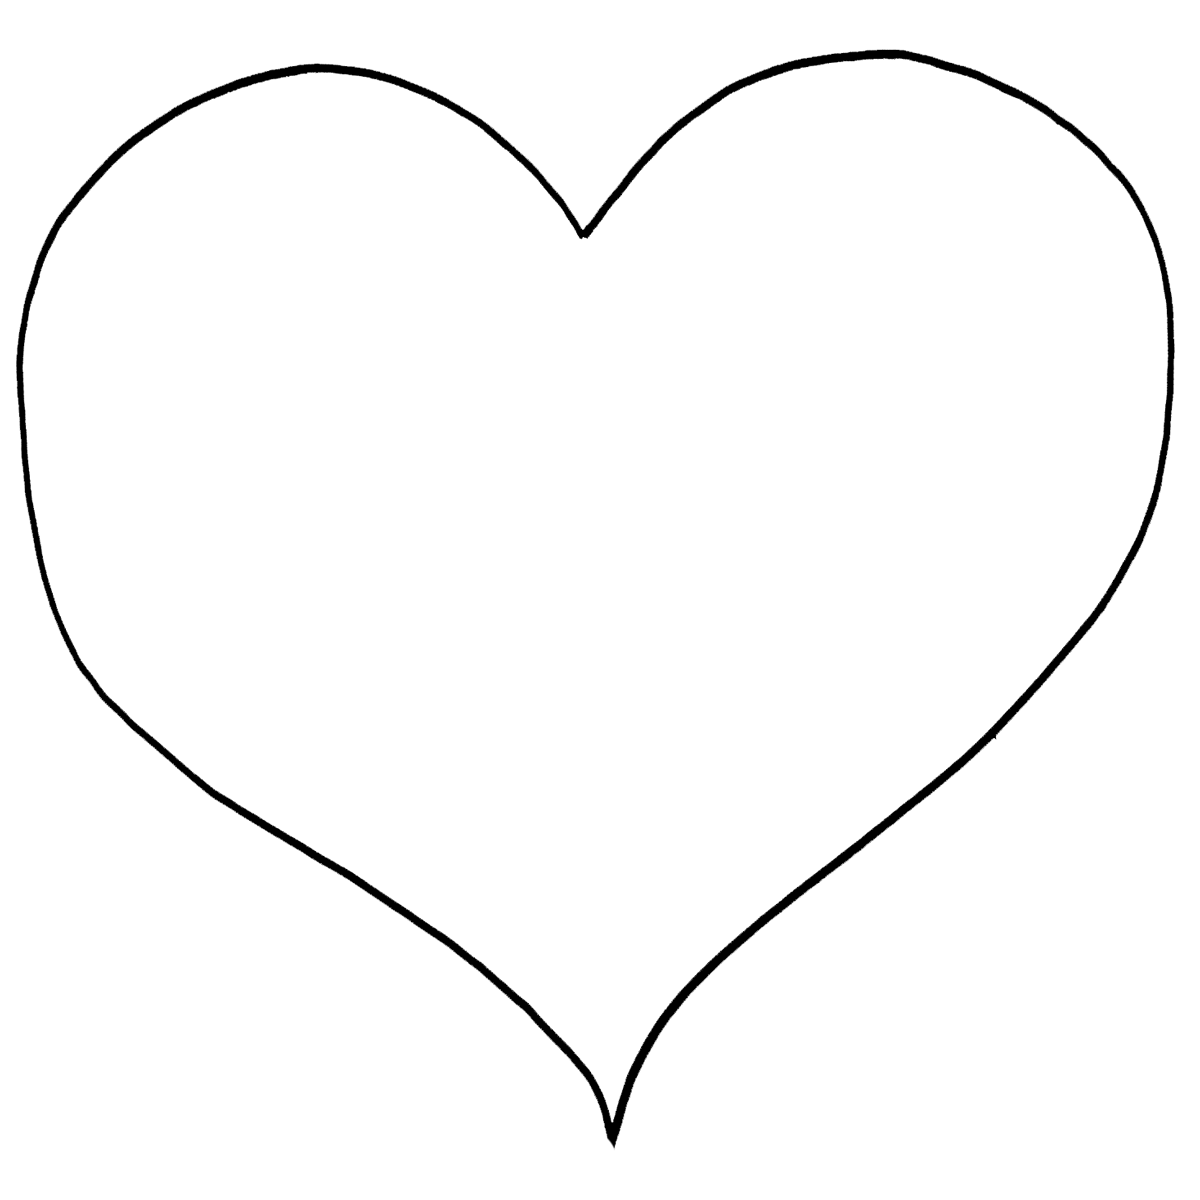 colouring love hearts heart coloring page crafting the word of god hearts love colouring 